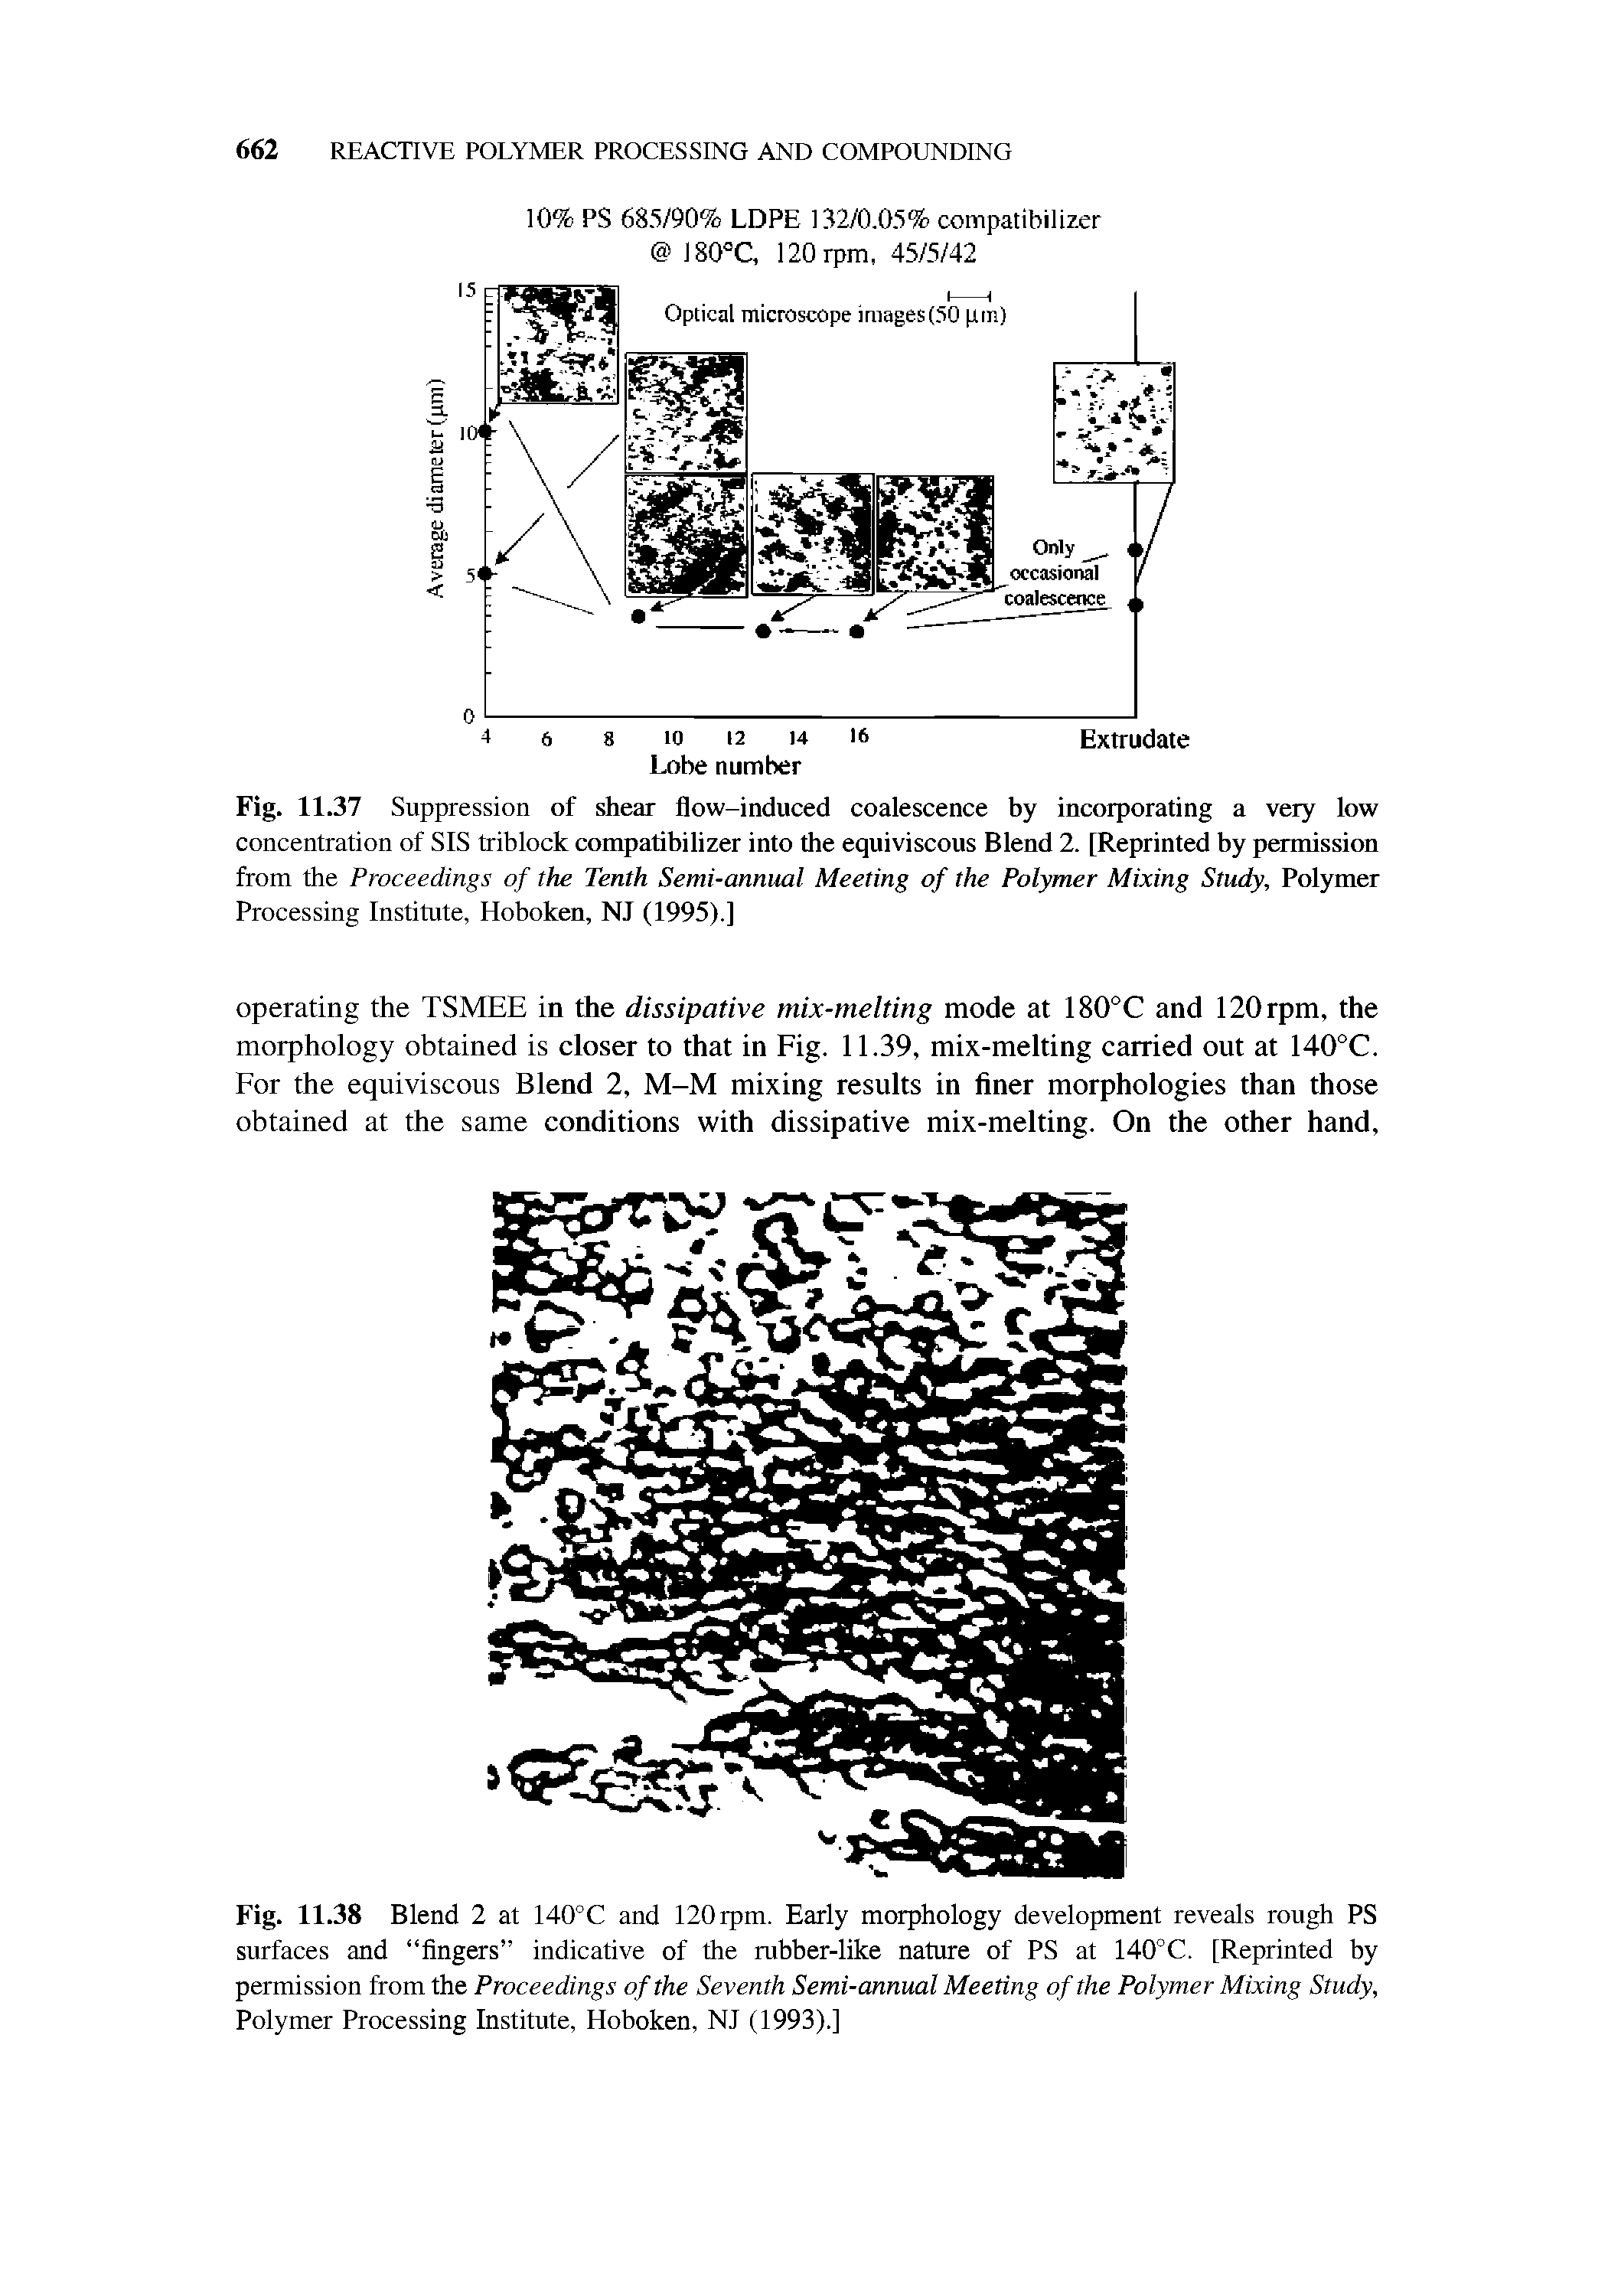 Fig. 11.37 Suppression of shear flow-induced coalescence by incorporating a very low concentration of SIS triblock compatibilizer into the equiviscous Blend 2. [Reprinted by permission from the Proceedings of the Tenth Semi-annual Meeting of the Polymer Mixing Study, Polymer Processing Institute, Hoboken, NJ (1995).]...